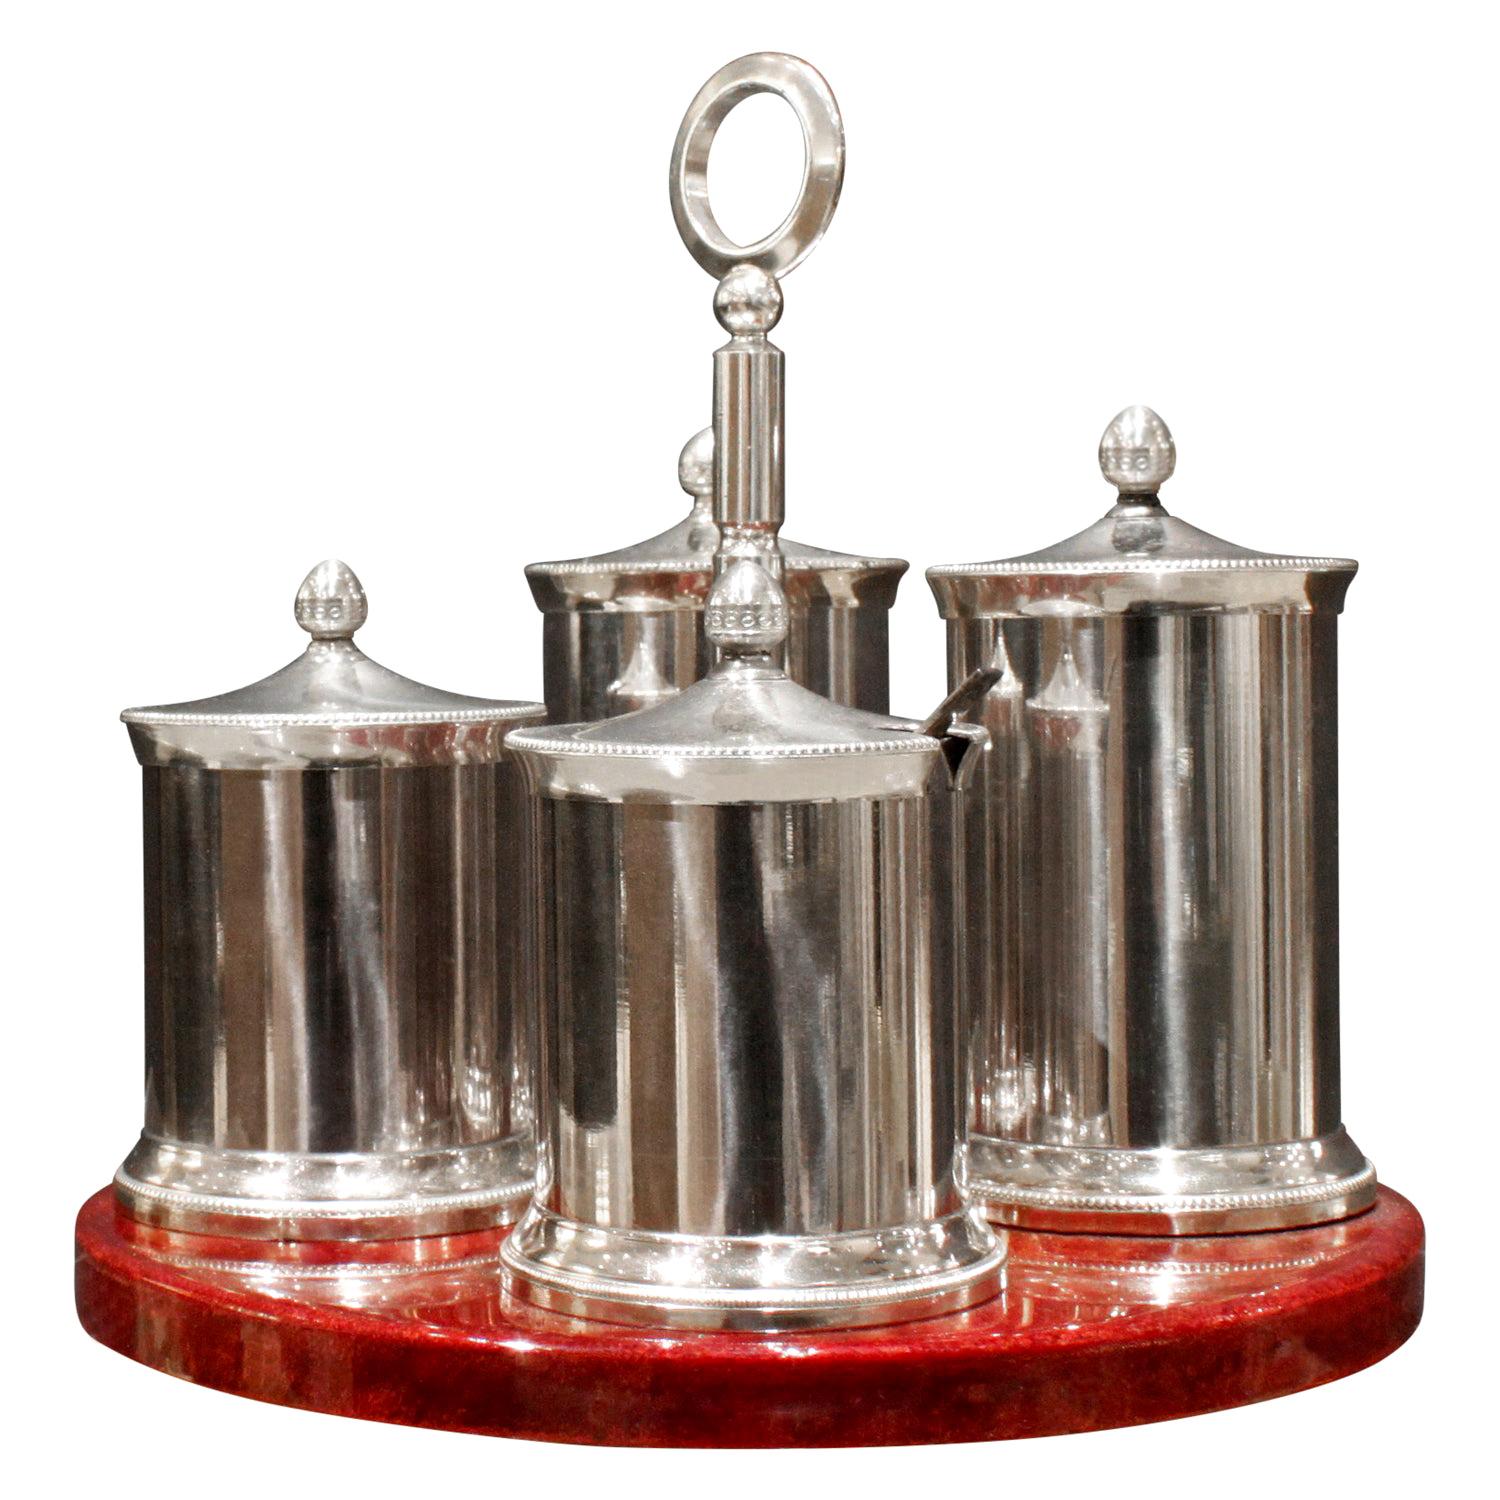 Aldo Tura Cruet Set in Red Lacquered Goatskin and Stainless Steel 1970s 'Signed'